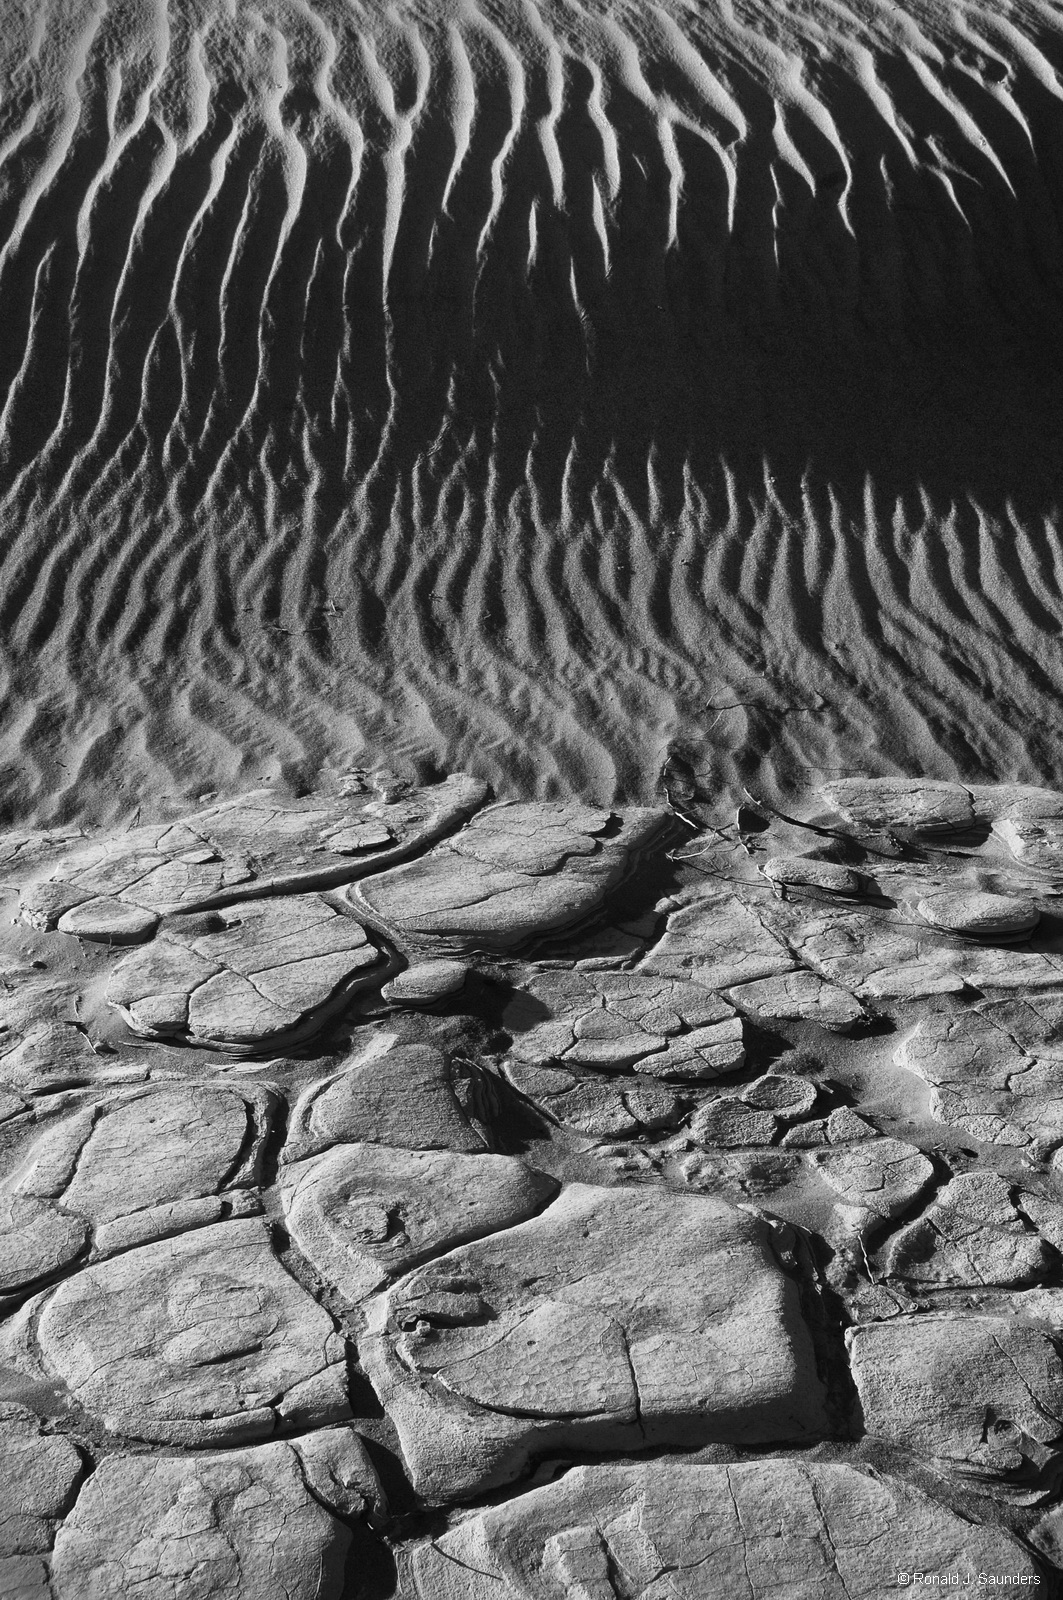 Wind and water continually change the playas at Death Valley. While a good sandstorm will erase tracks in the sand, the baked...